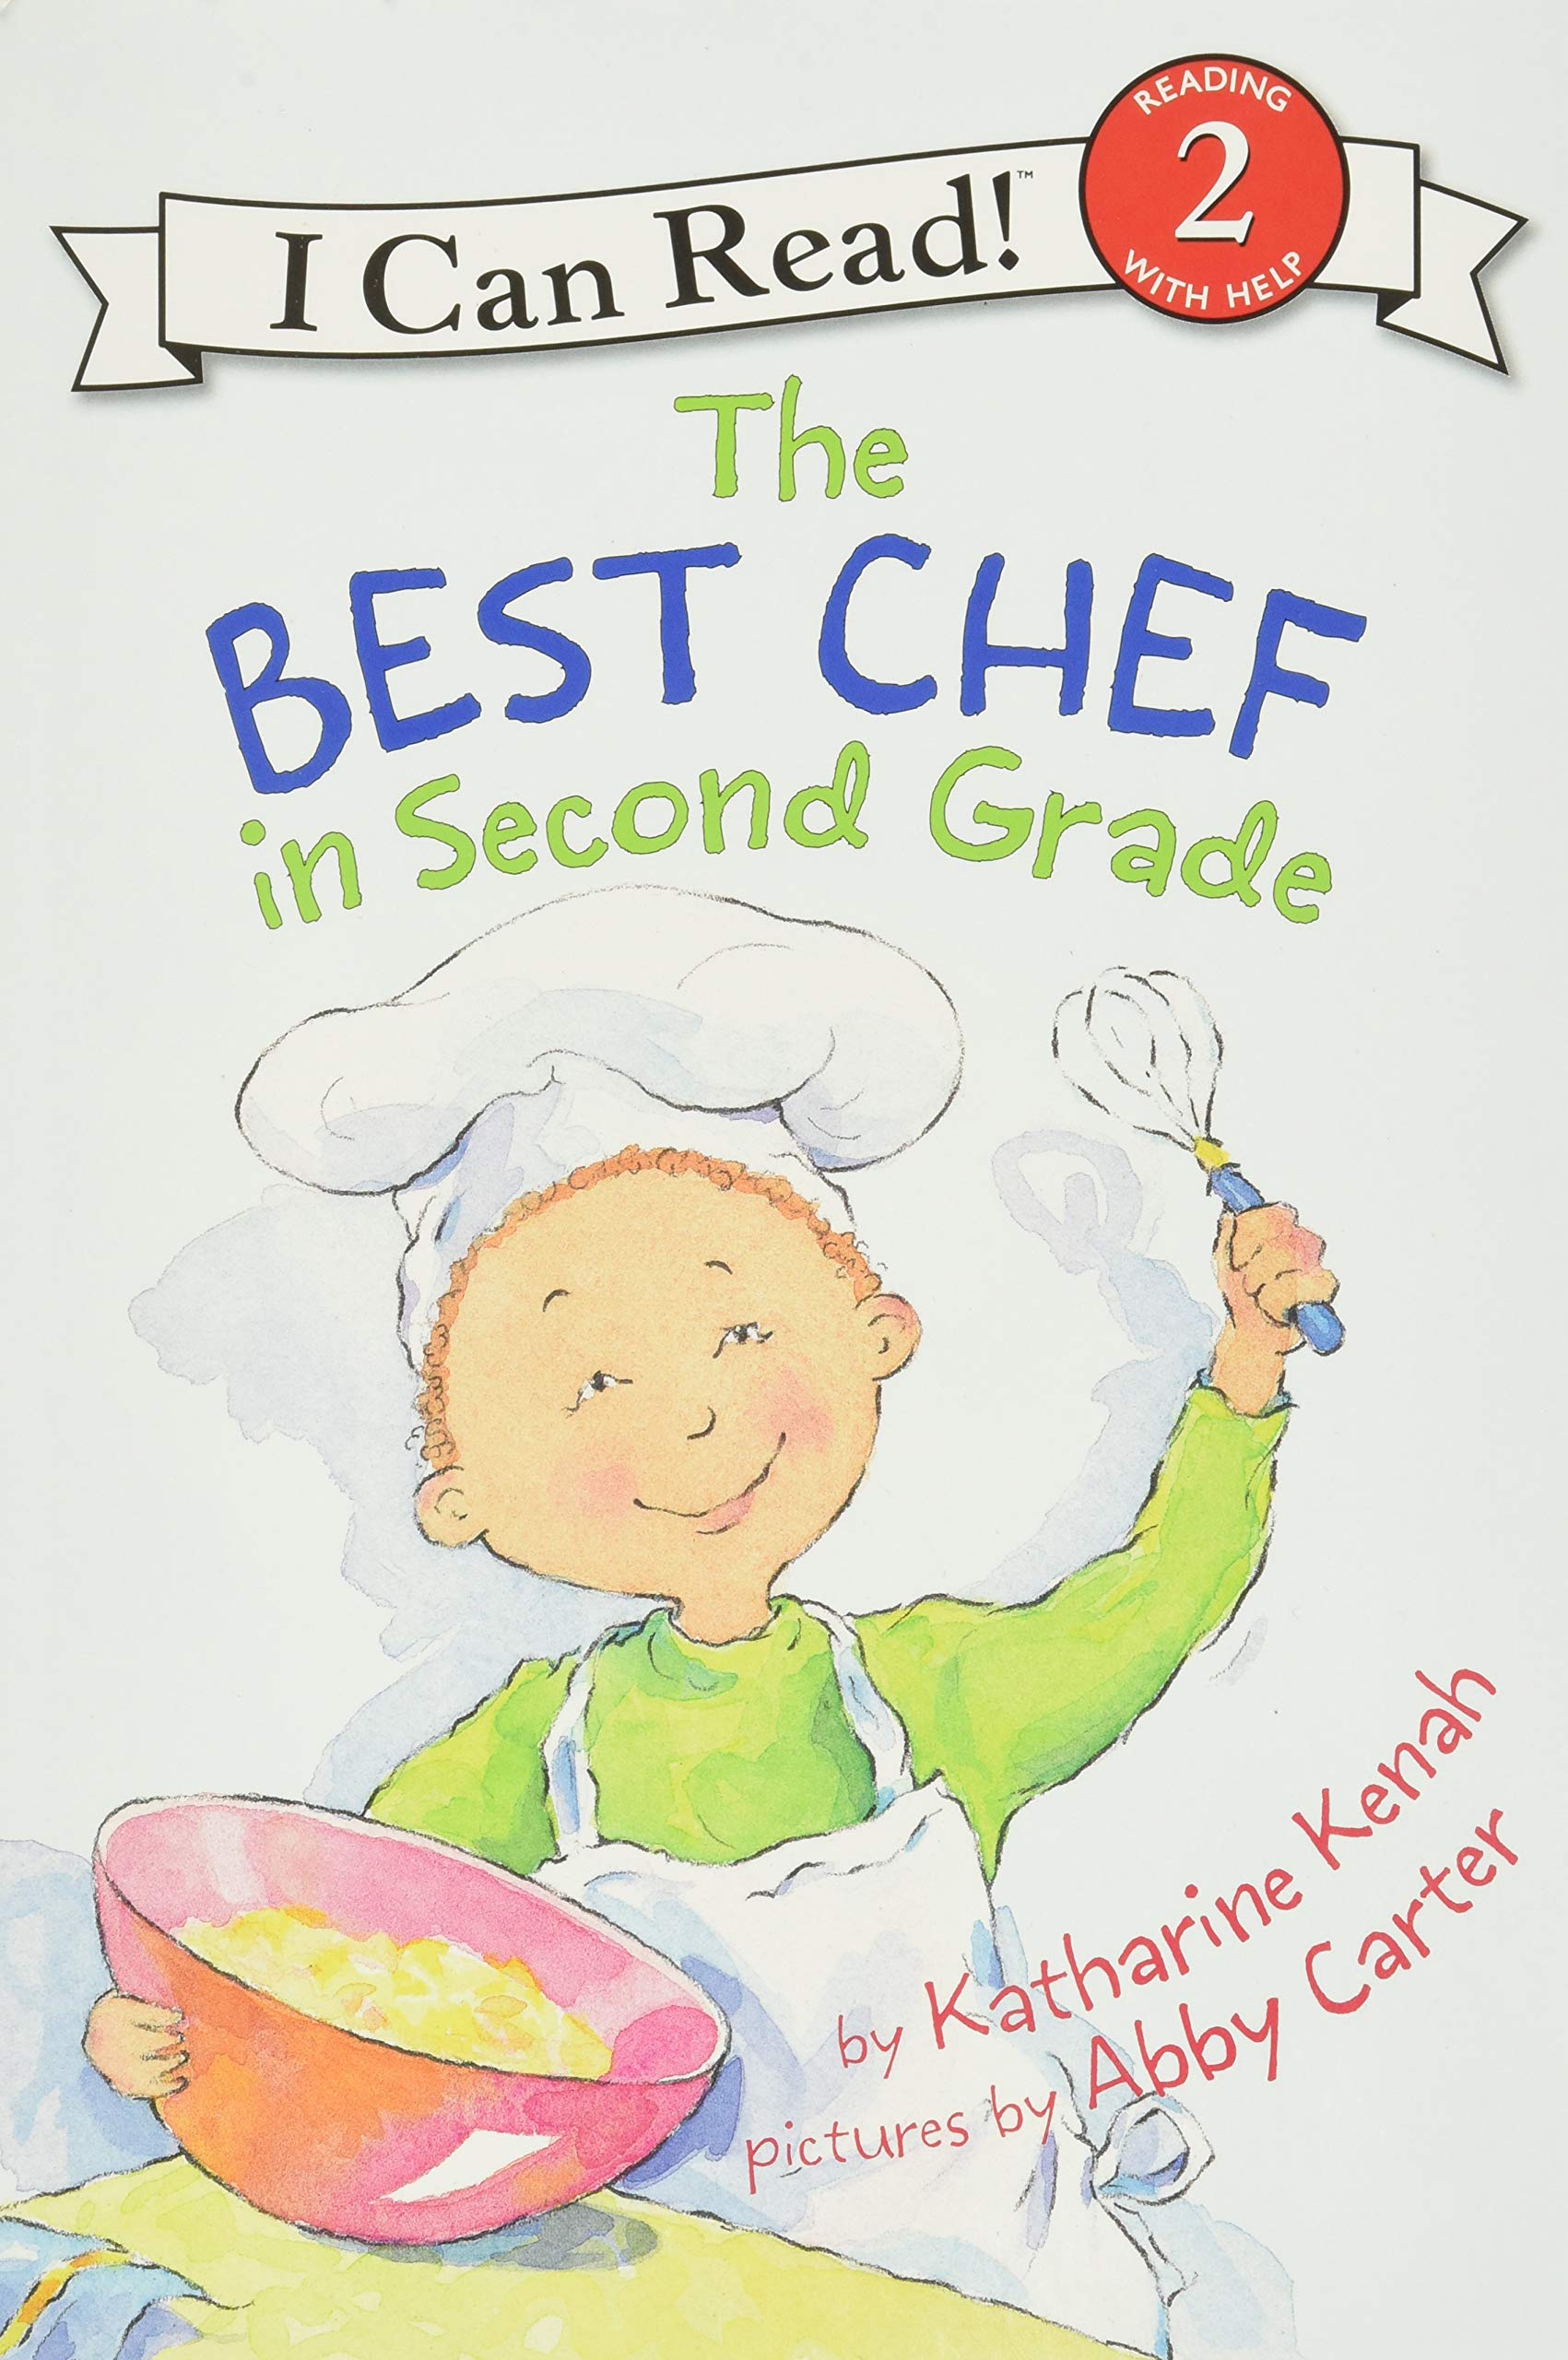 IMG : I can Read Level 2 The Best Chef in second grade